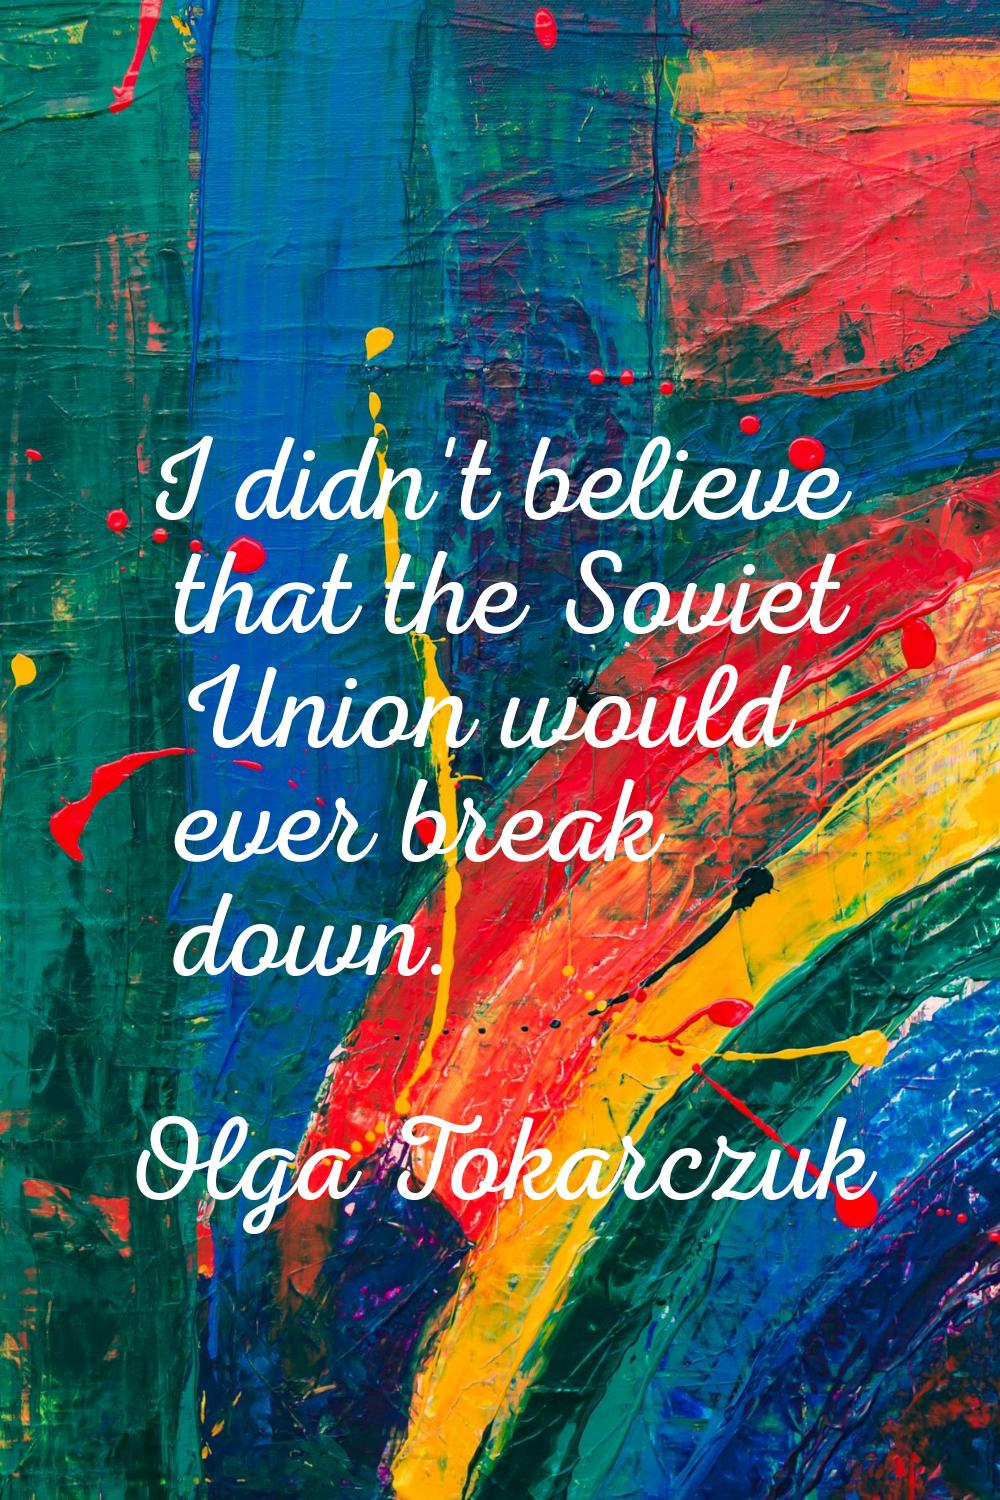 I didn't believe that the Soviet Union would ever break down.